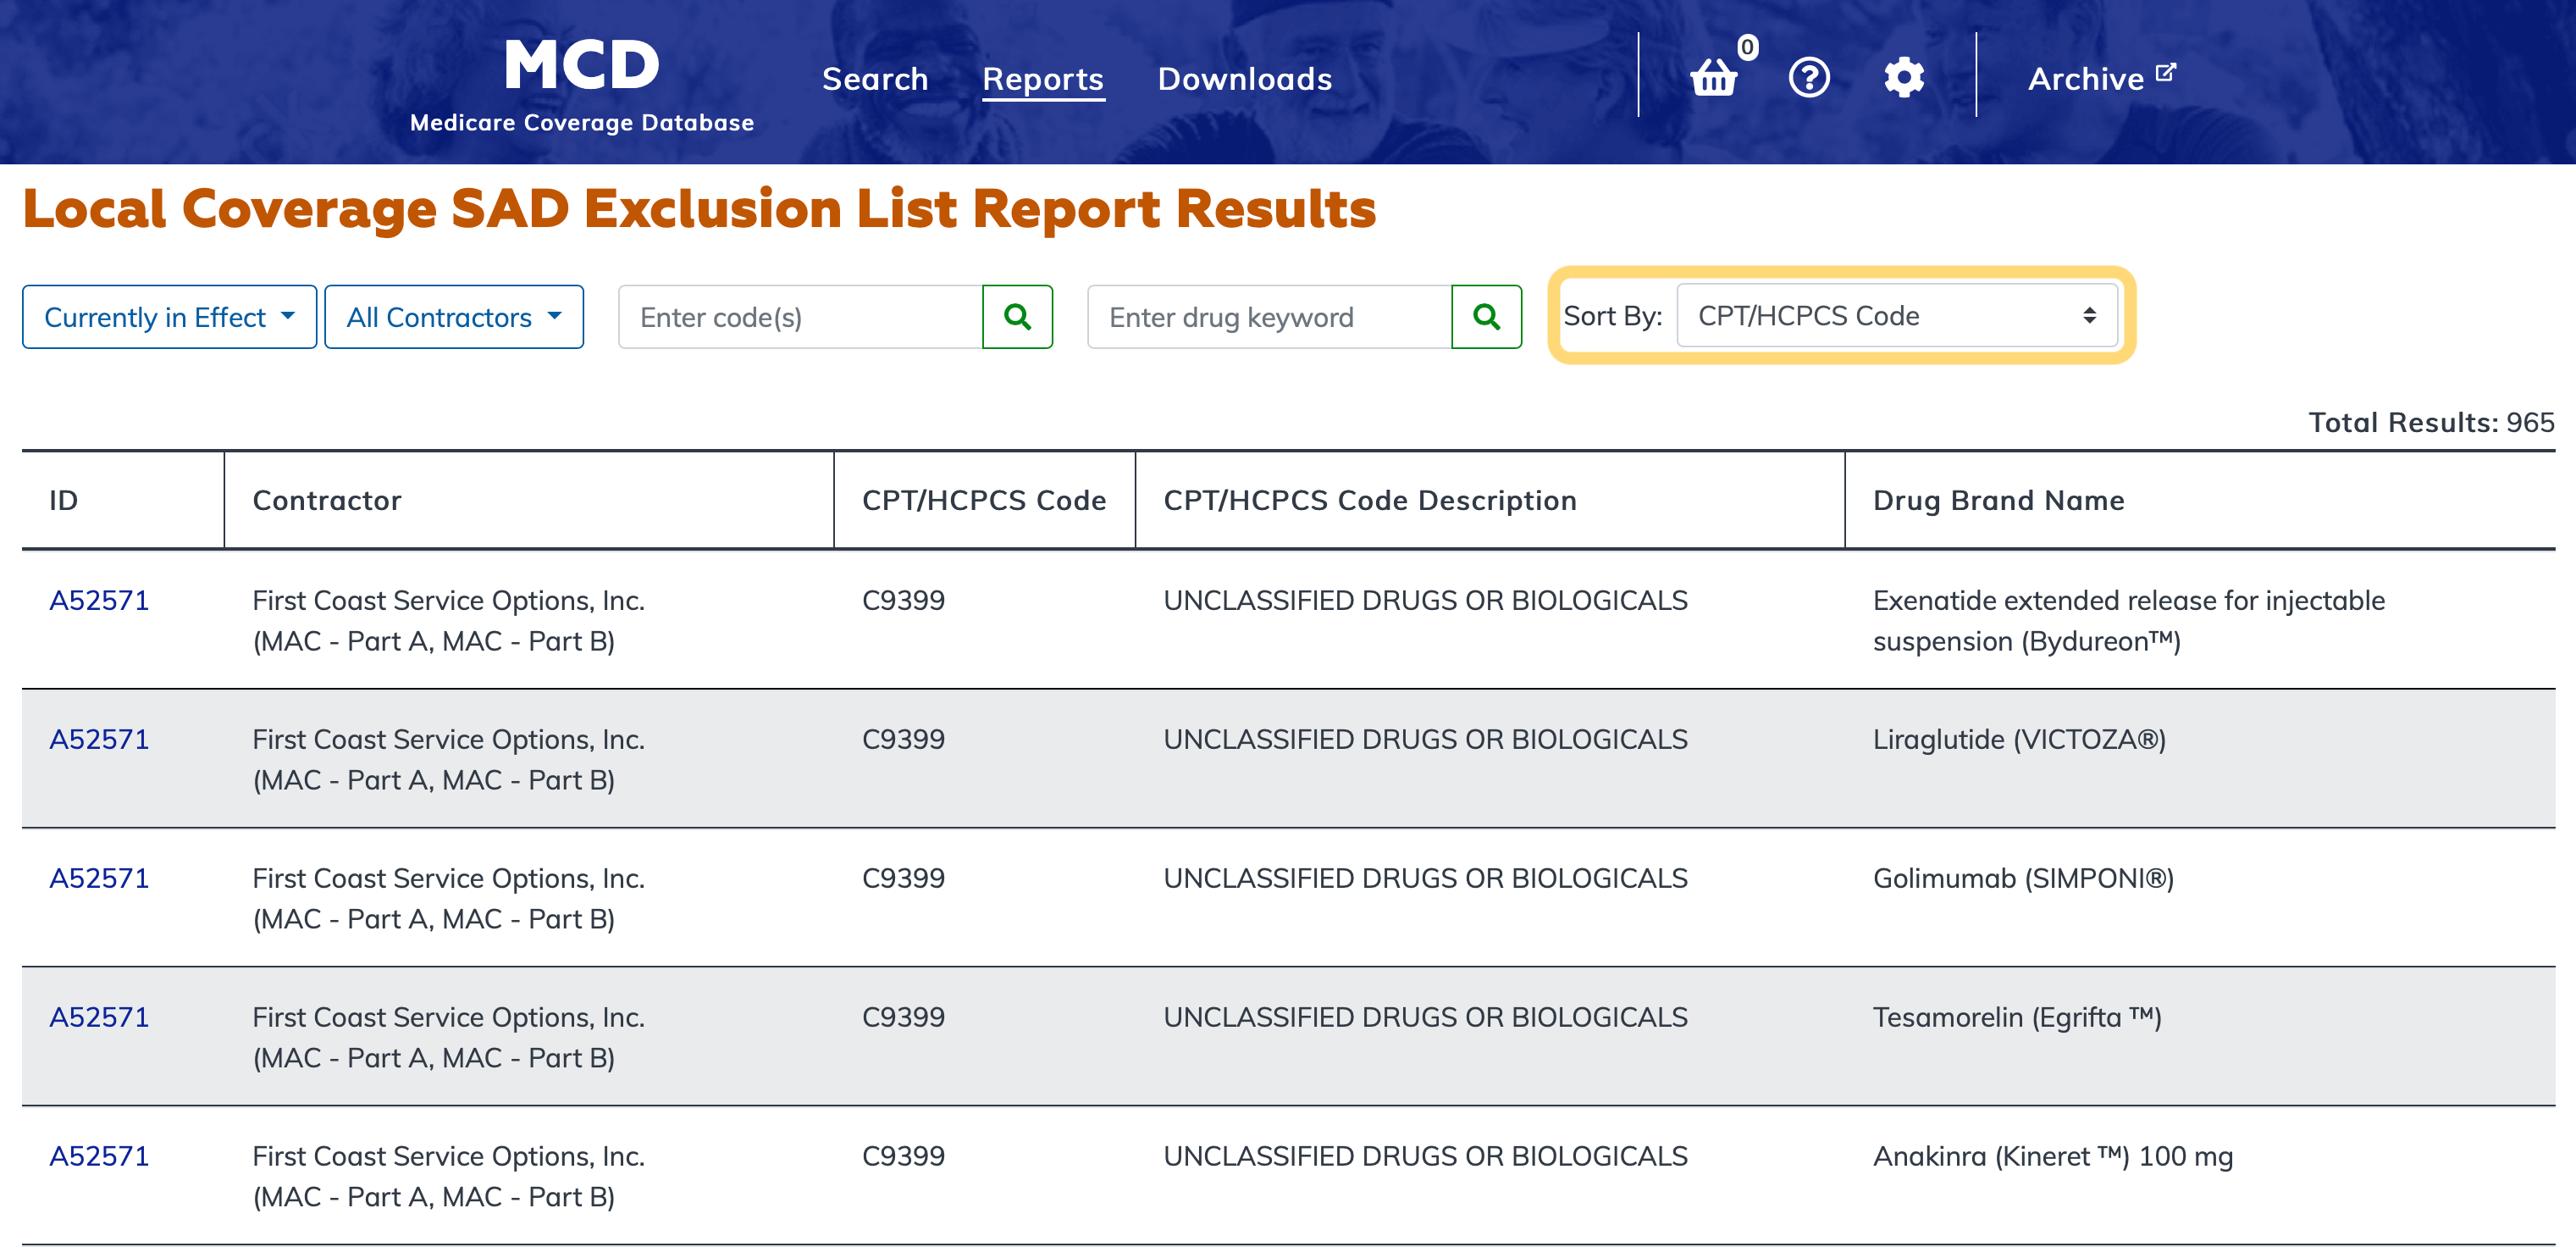 Local Coverage SAD Exclusion List Report sort option highlighted